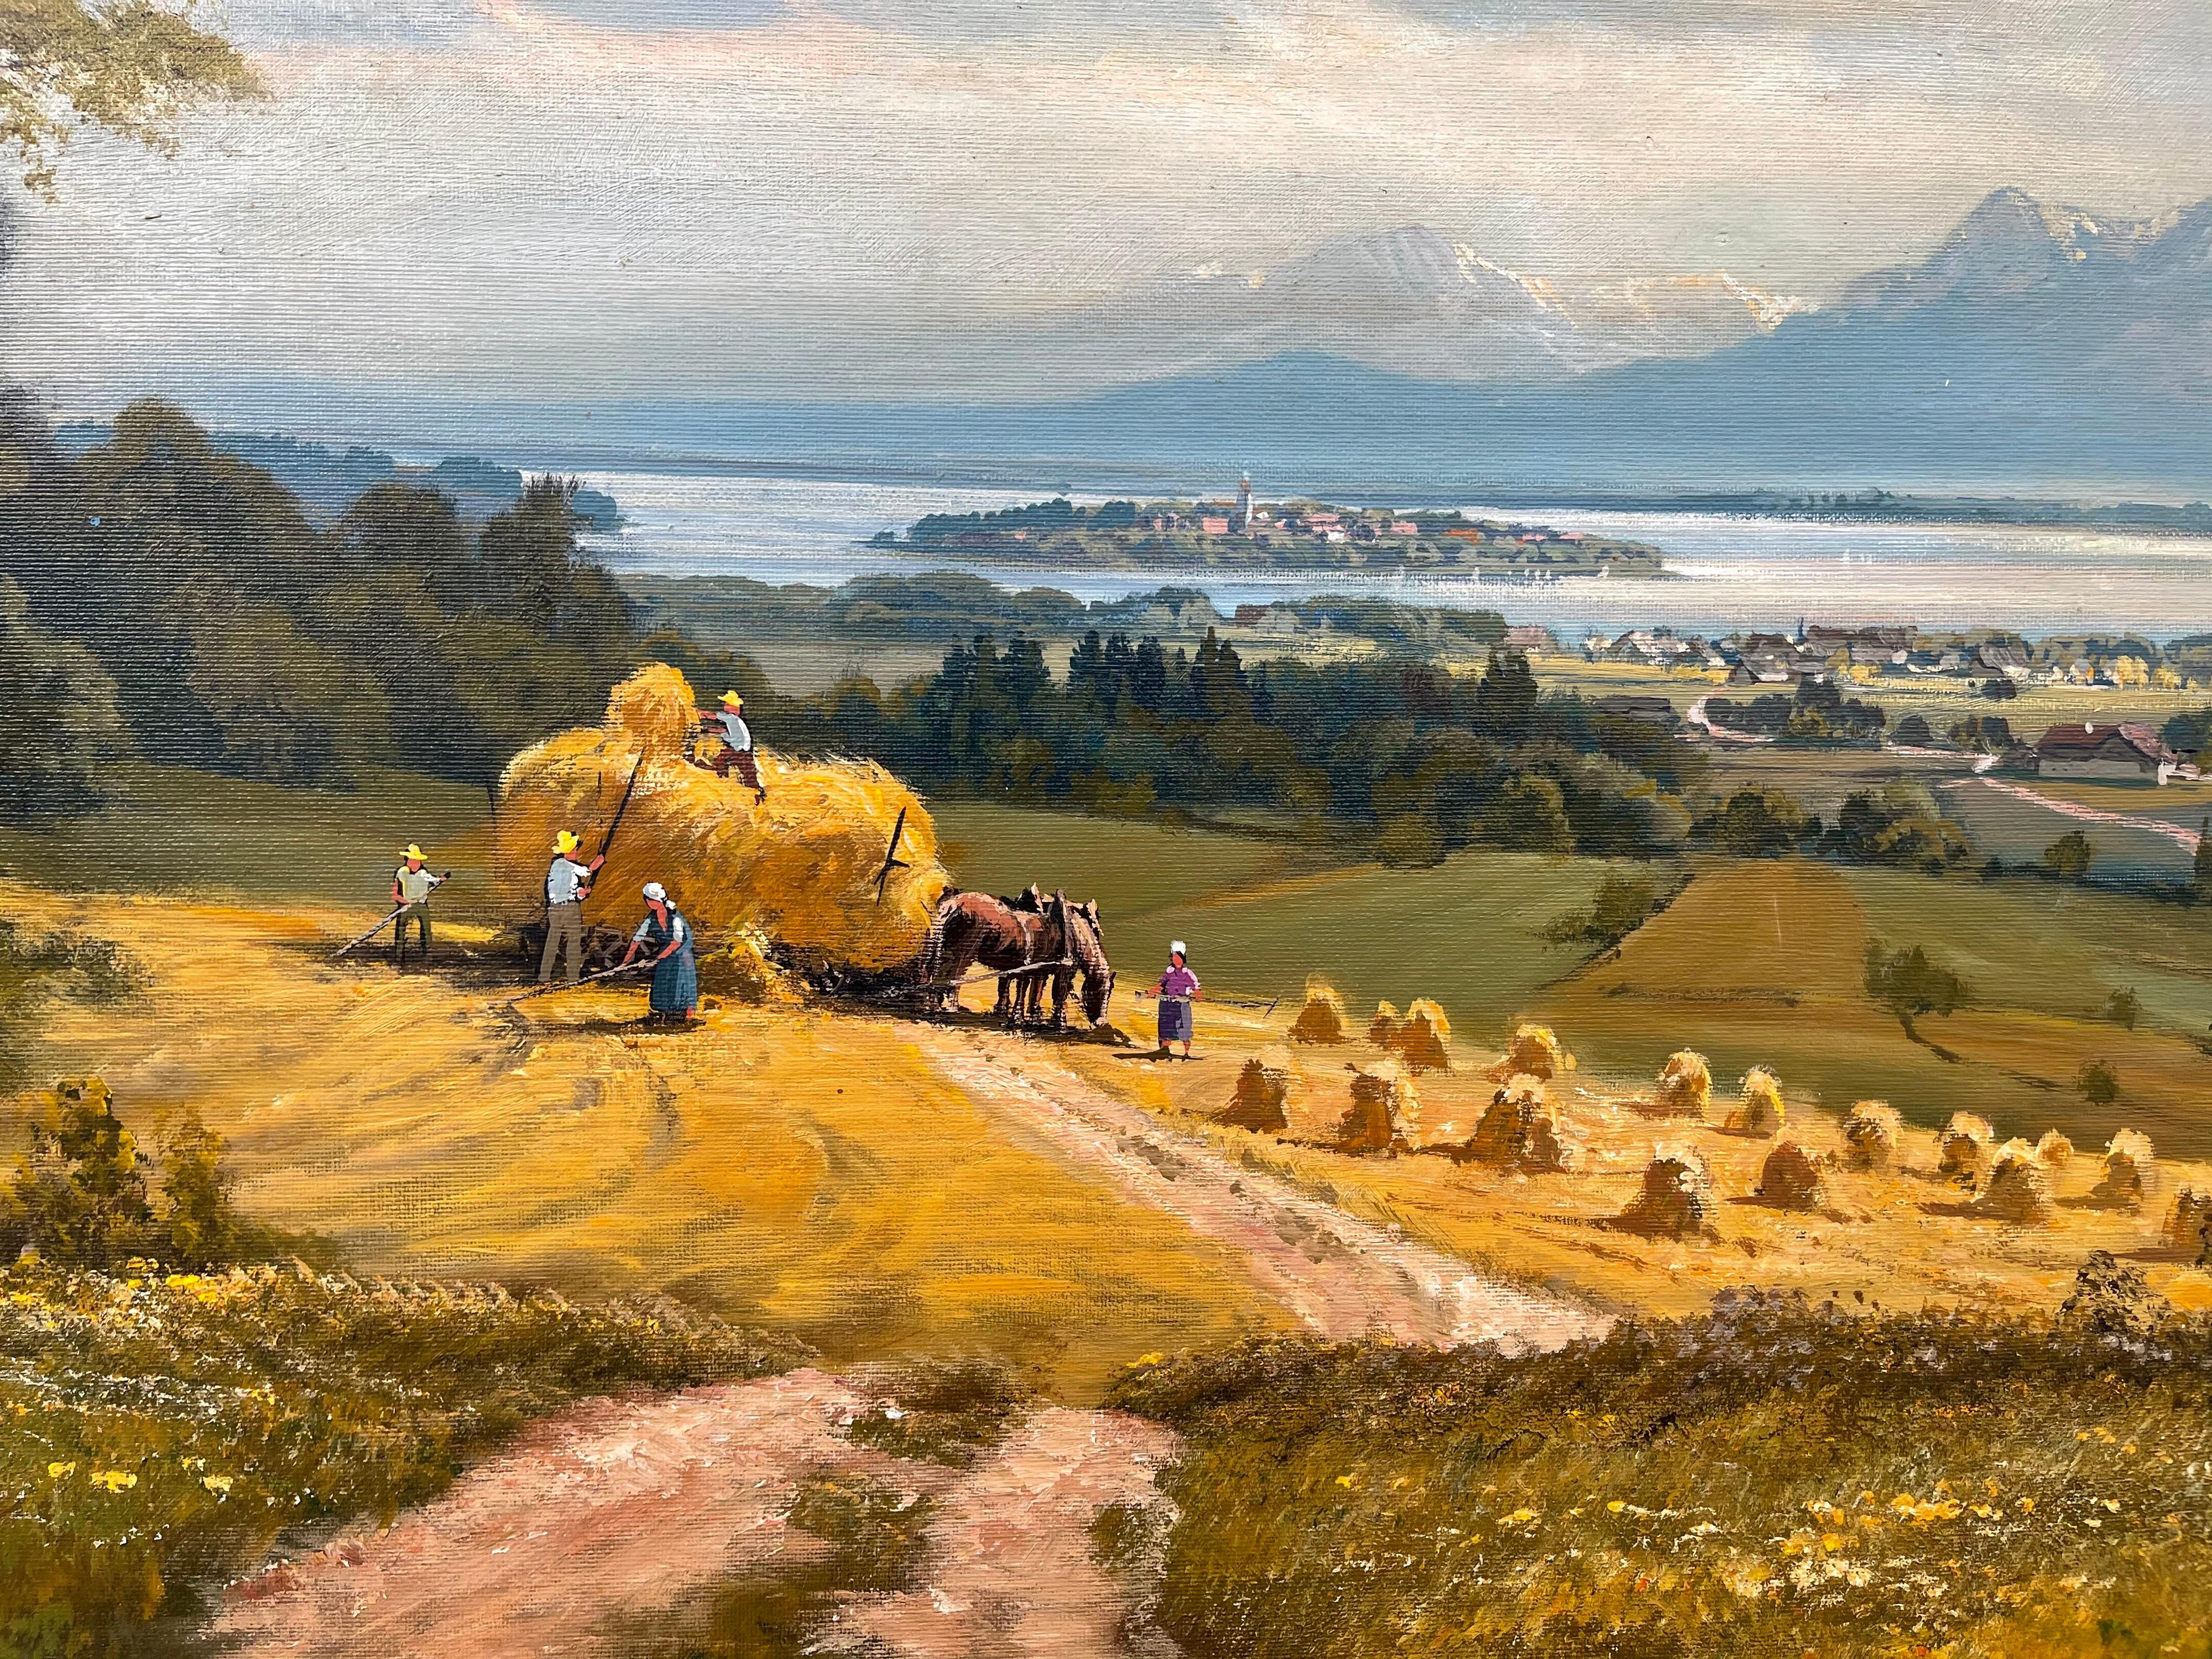 Alpine Haymaking 20th Century Realist Oil Painting by German Landscape Artist  - Brown Figurative Painting by Wolfgang Heinz